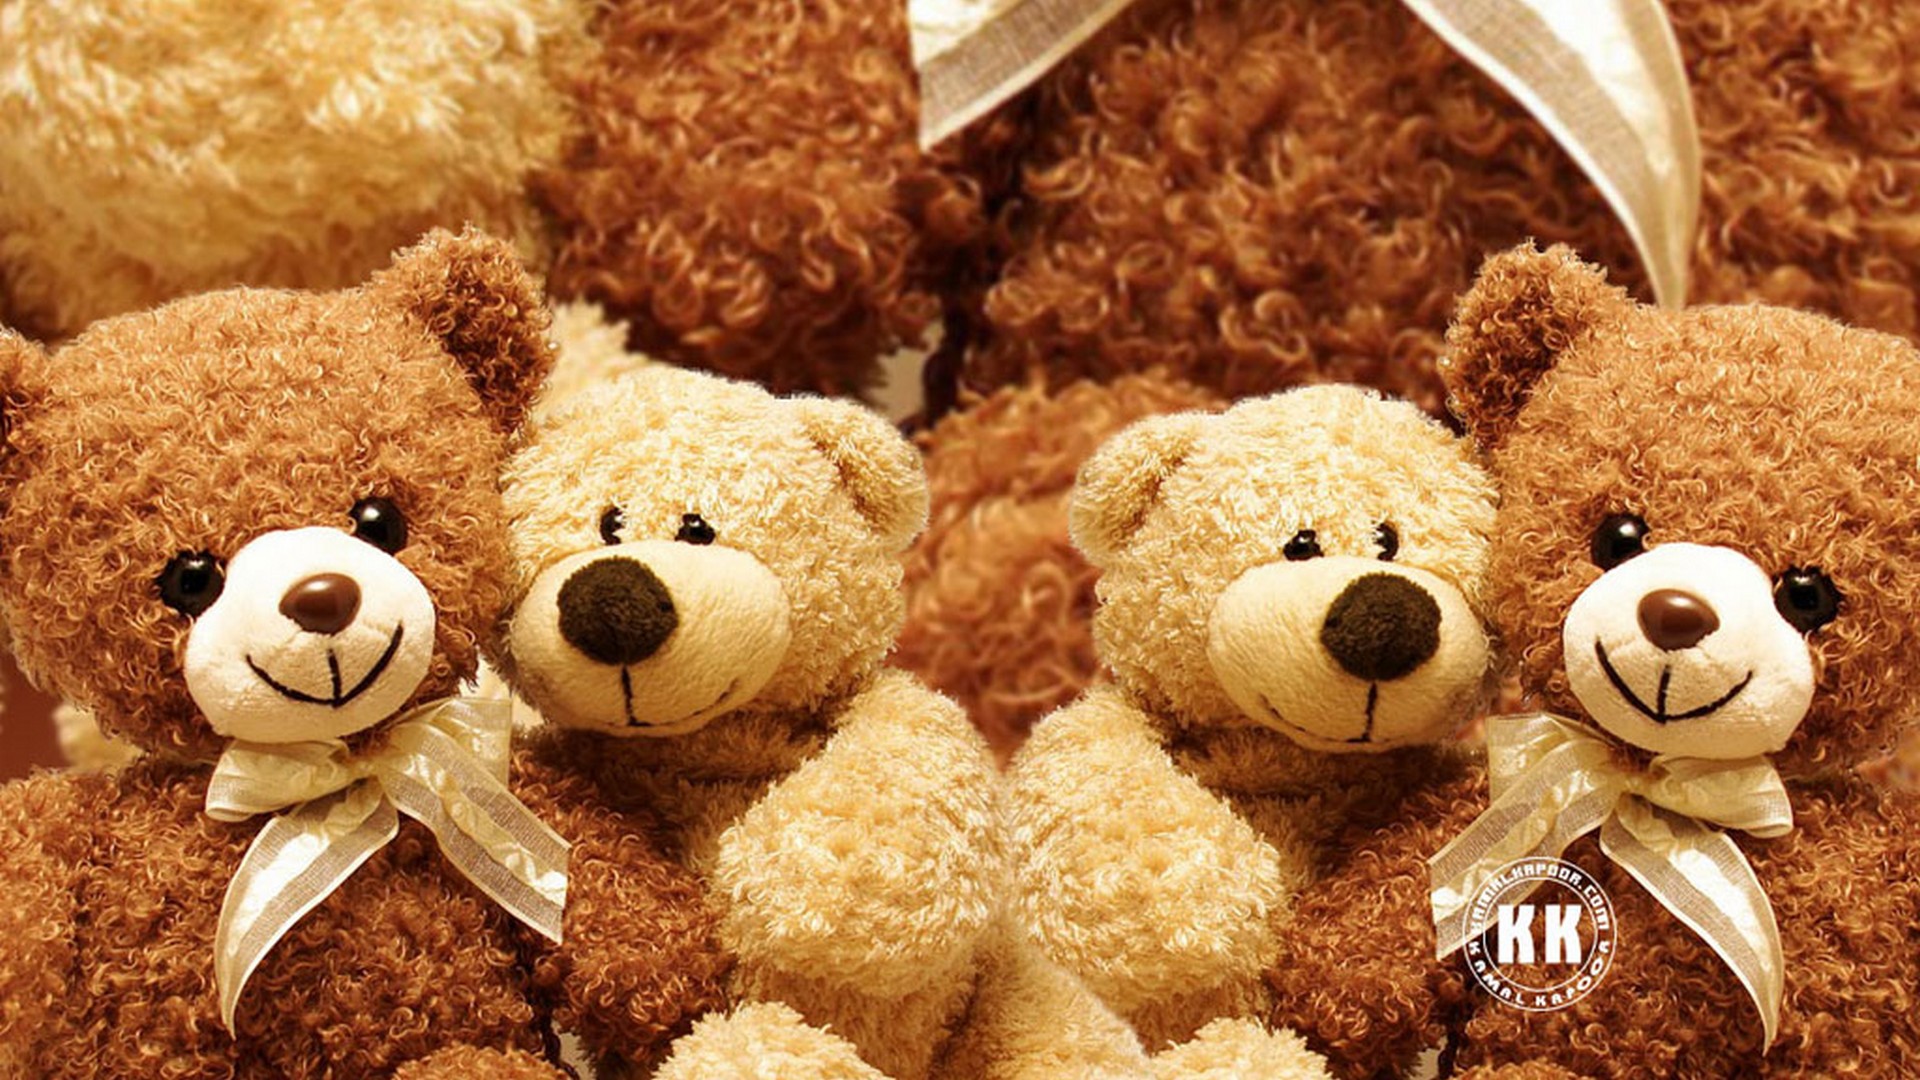 Wallpaper Teddy Bear Big HD with image resolution 1920x1080 pixel. You can make this wallpaper for your Desktop Computer Backgrounds, Mac Wallpapers, Android Lock screen or iPhone Screensavers